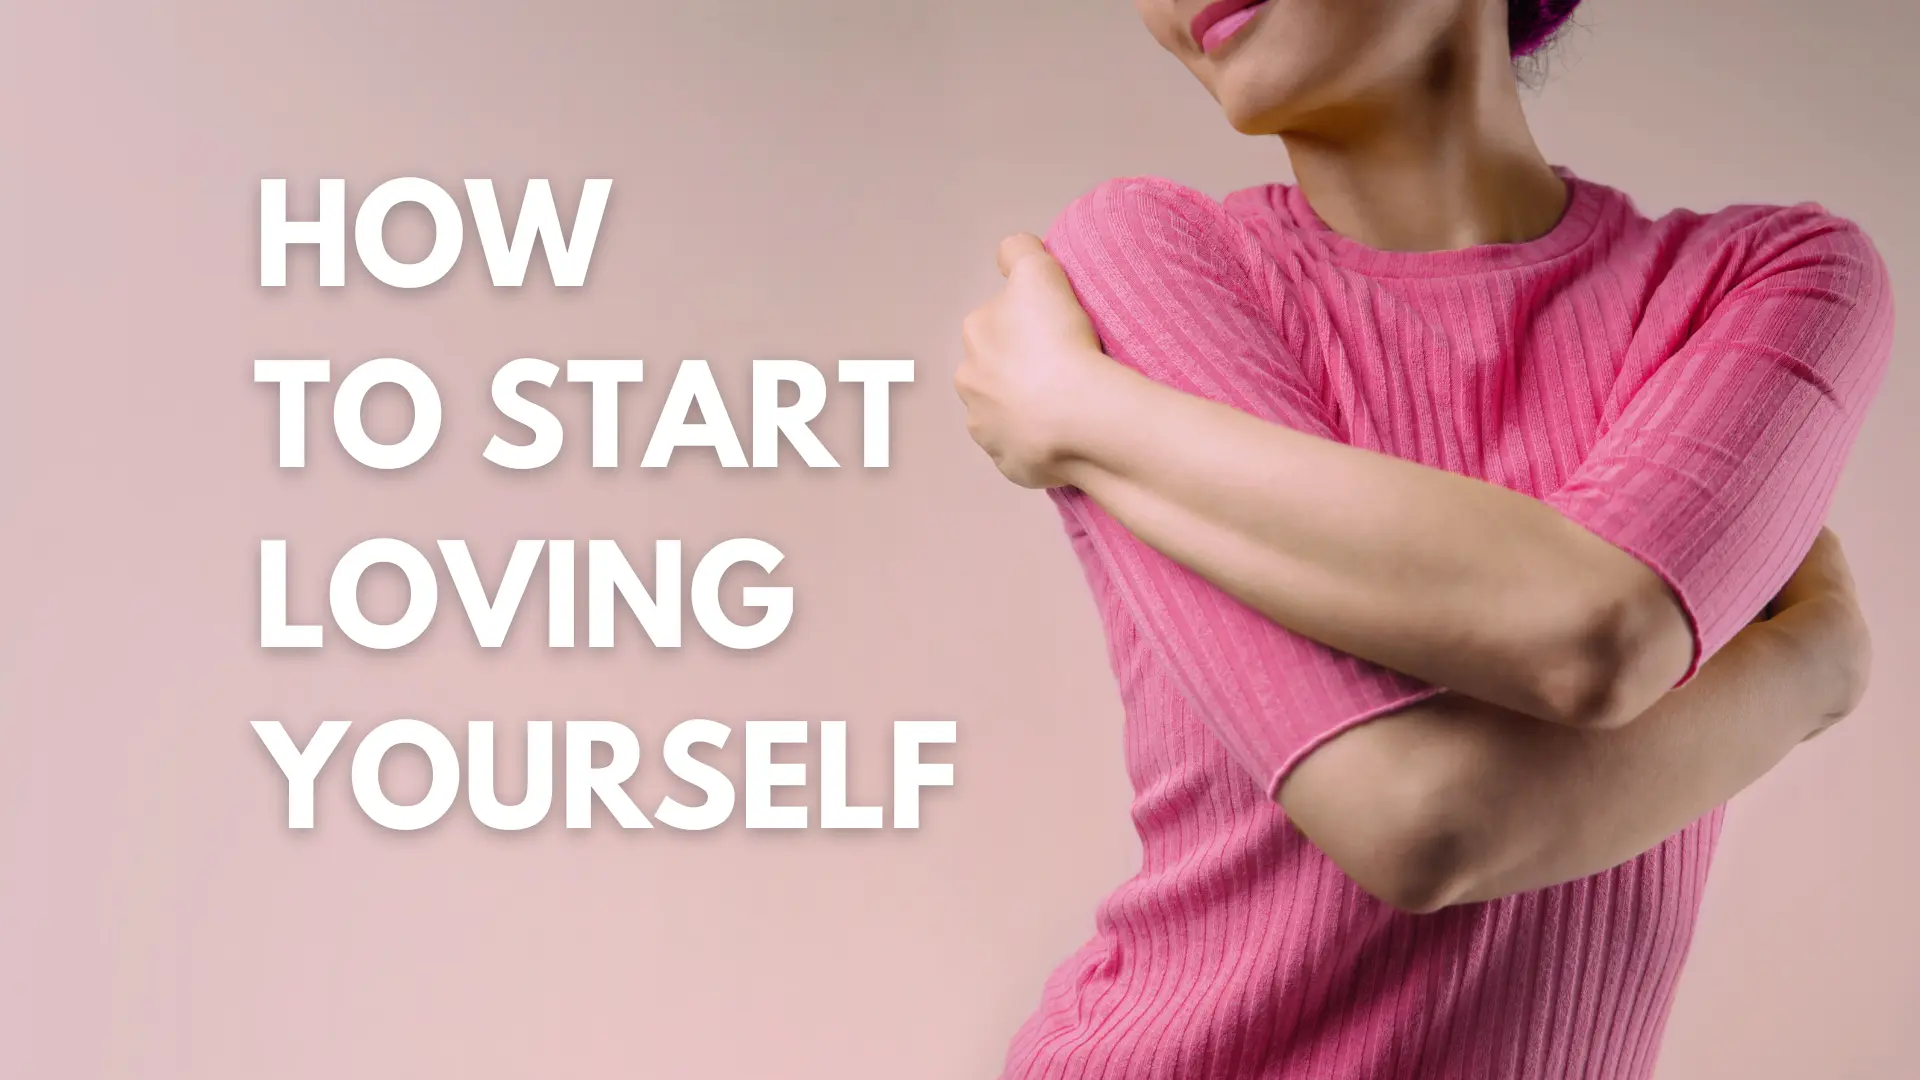 HOW TO START LOVING YOURSELF